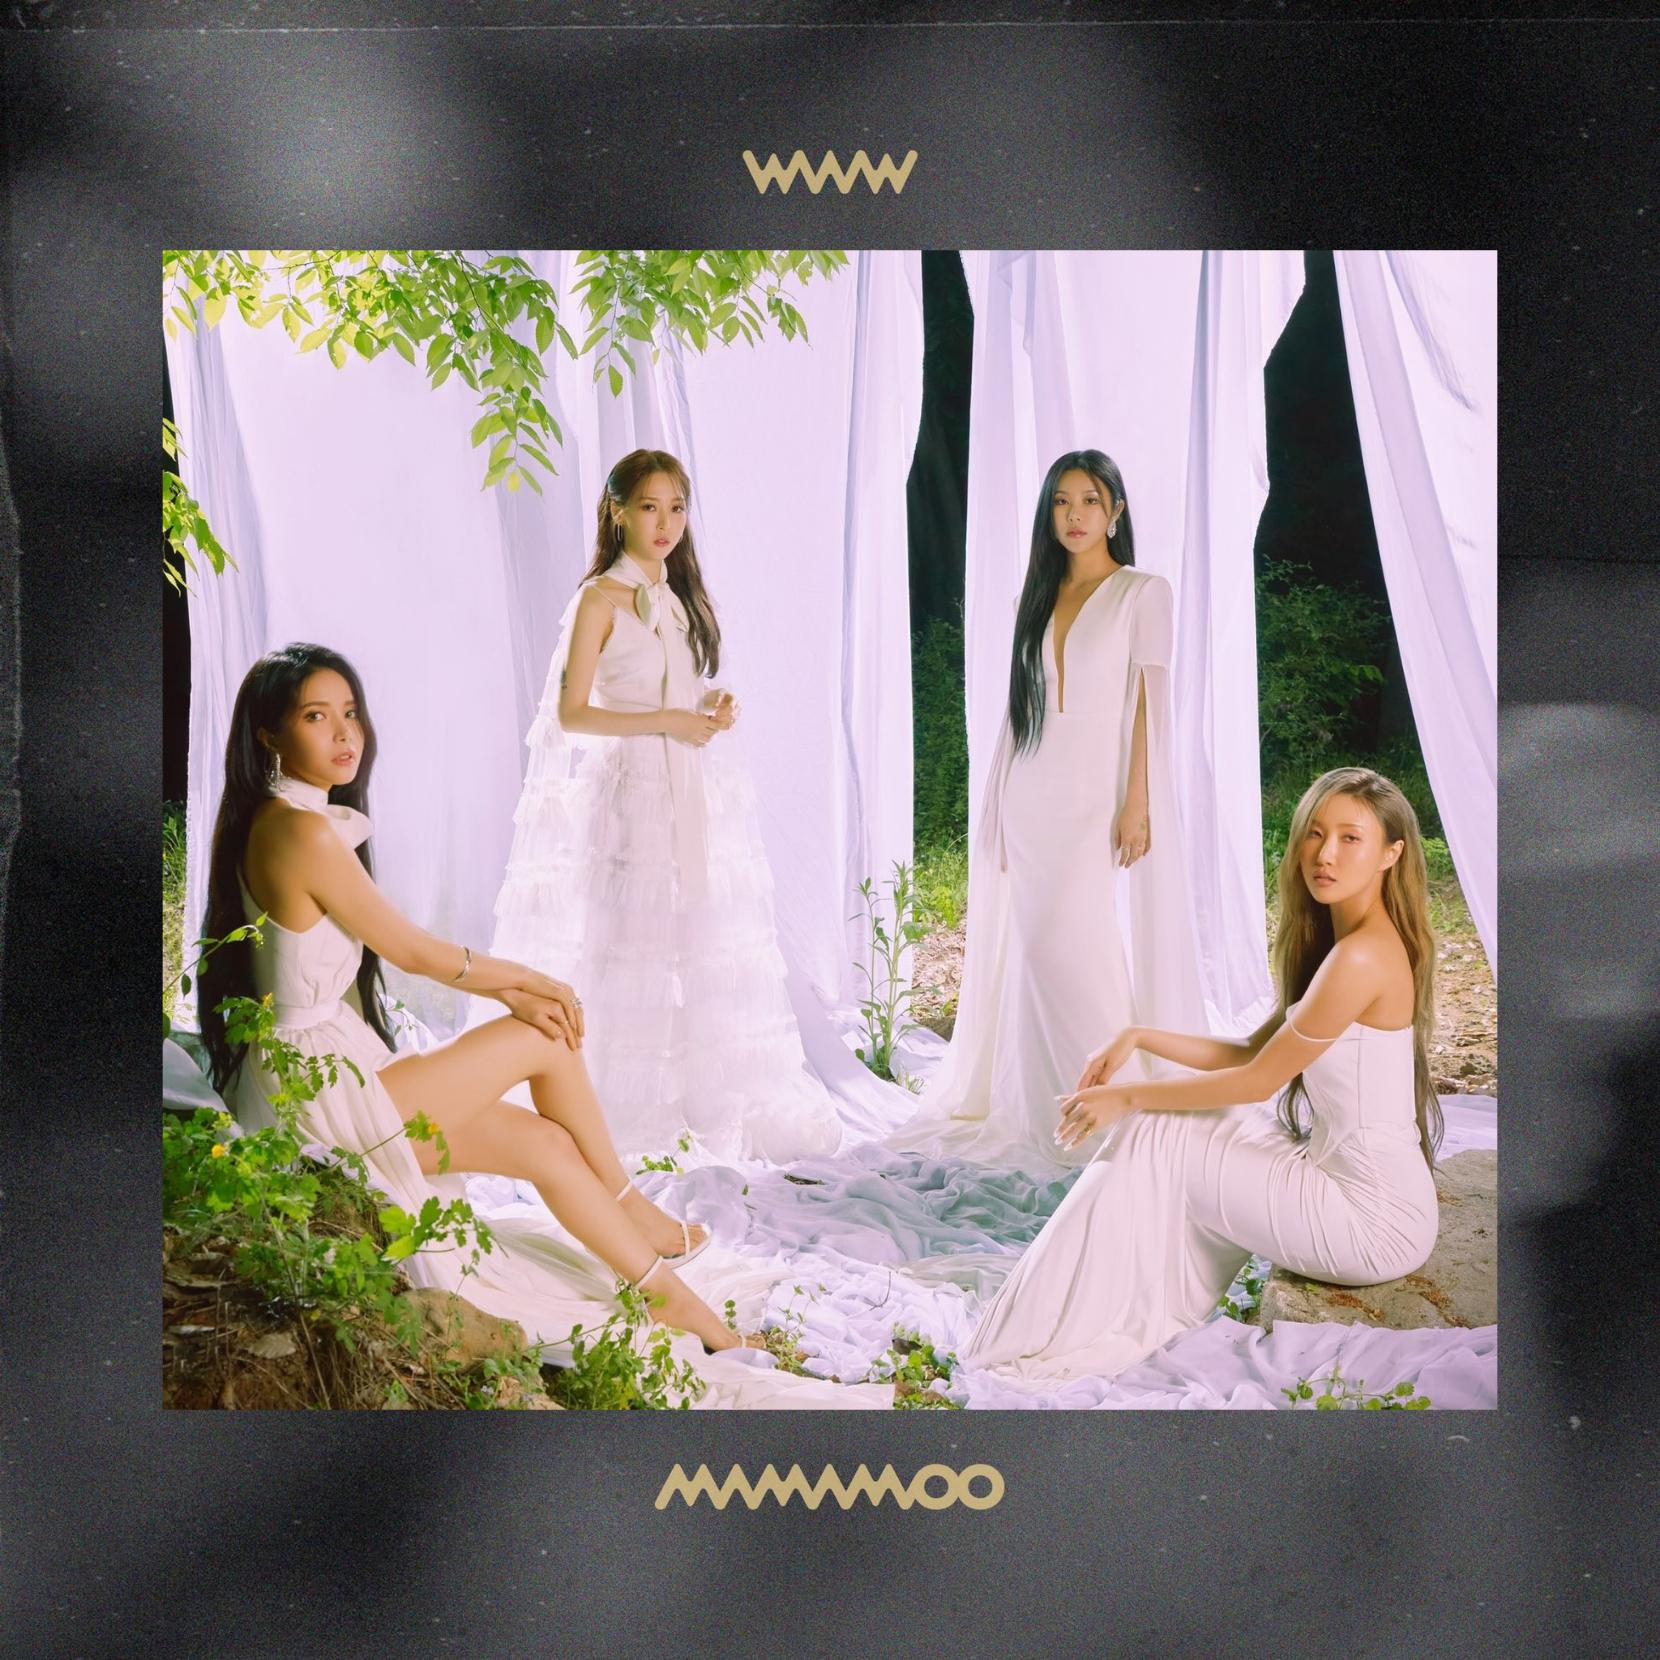 MAMAMOO - WAW (ALBUM COVER) by Kyliemaine on DeviantArt